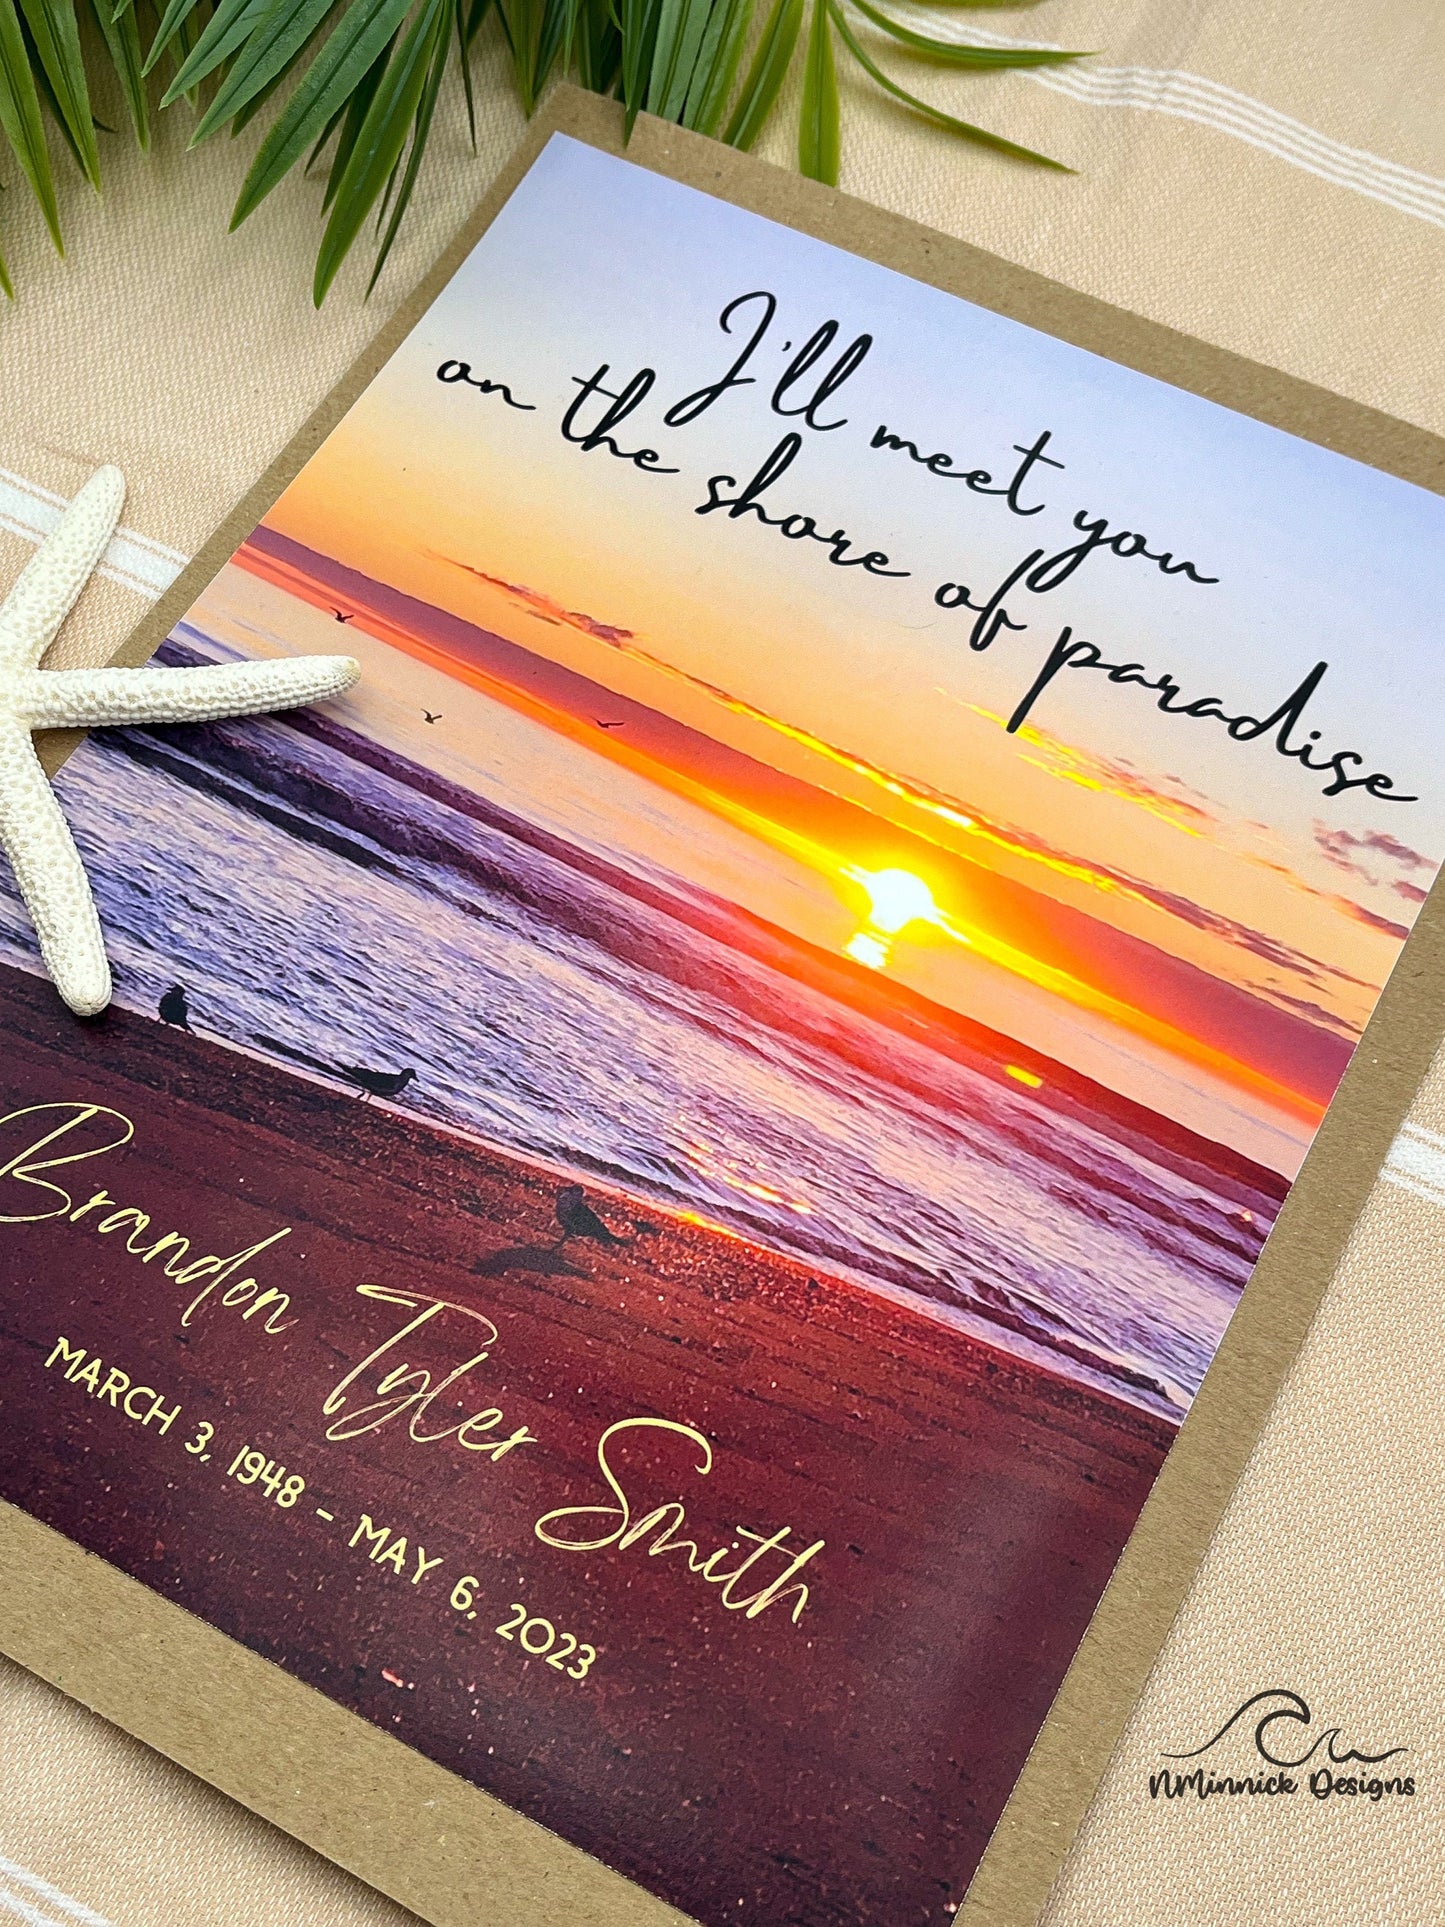 Sunrise Print with Memorial Poem, Sympathy Gift, I'll Meet You on The Shore of Paradise, Remembrance Gift, Poem Print, Bereavement Gift